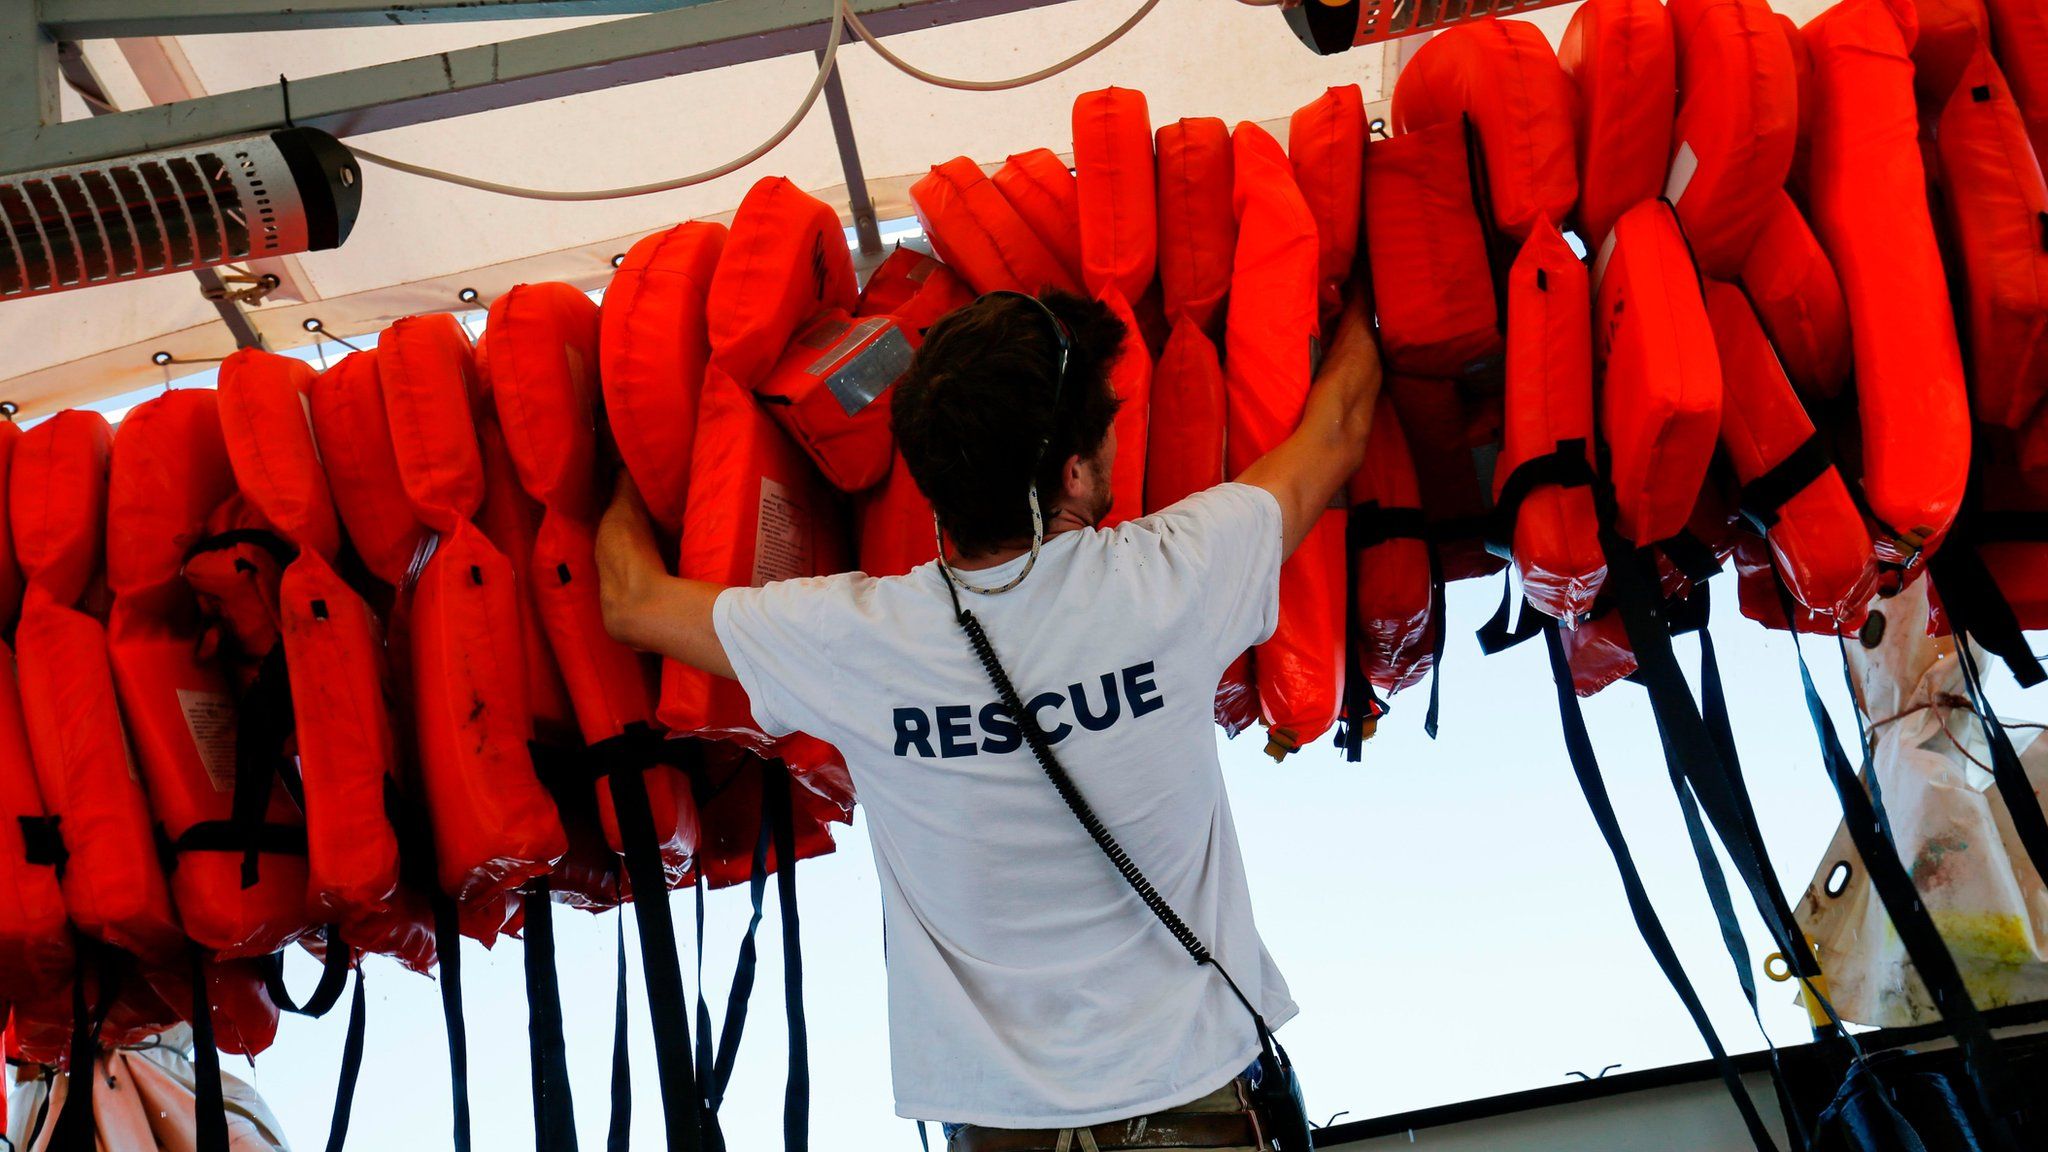 A member of SOS-Mediterranee checks life vests aboard the Aquarius rescue vessel, chartered by French NGO SOS-Mediterranee and Doctors Without Borders (MSF) as it sails to the SAR (Search and Rescue) area on June 22, 2018 in open sea between Algeria and Tunisia